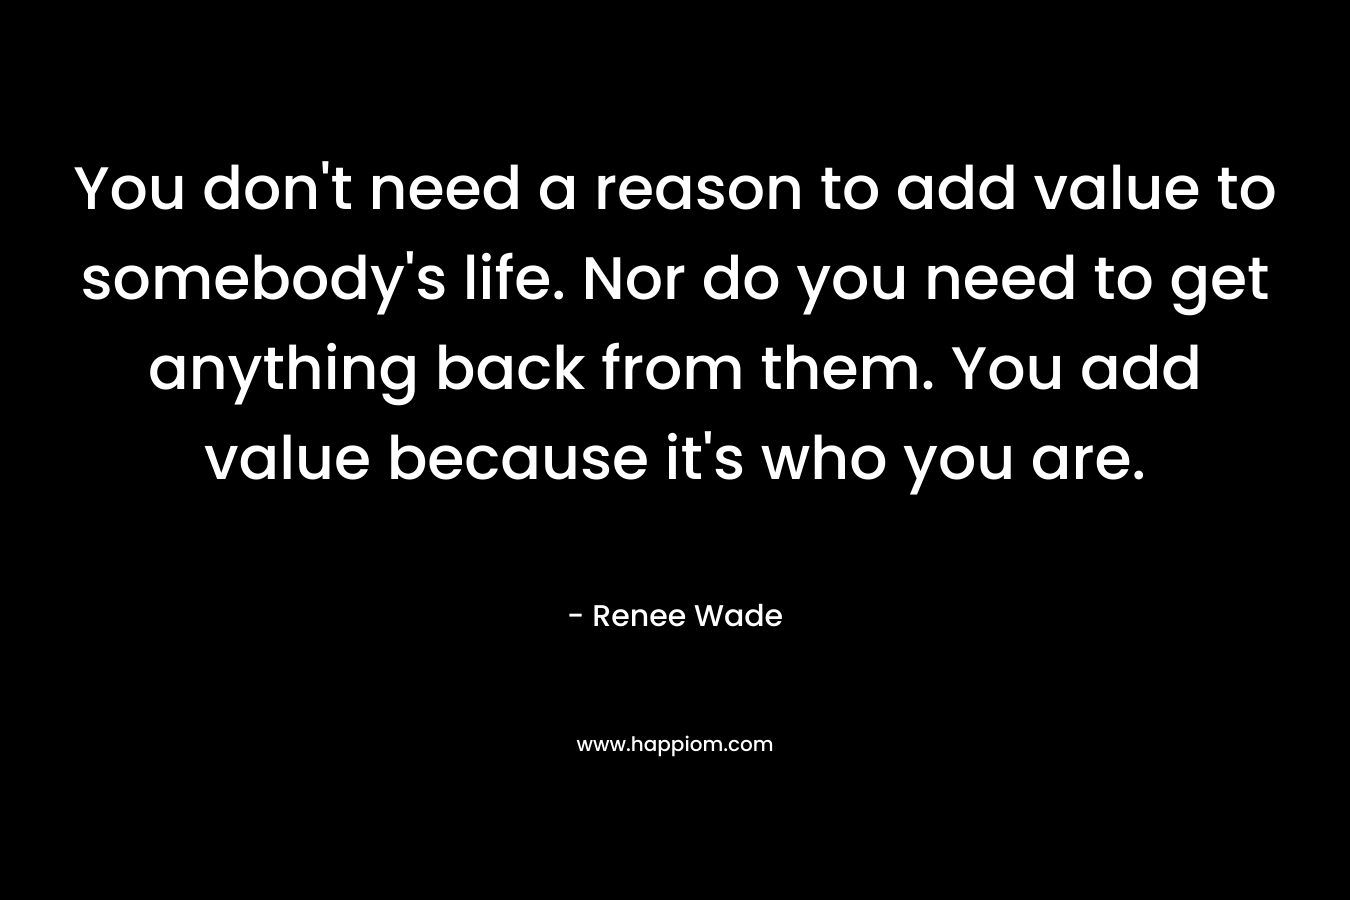 You don't need a reason to add value to somebody's life. Nor do you need to get anything back from them. You add value because it's who you are.